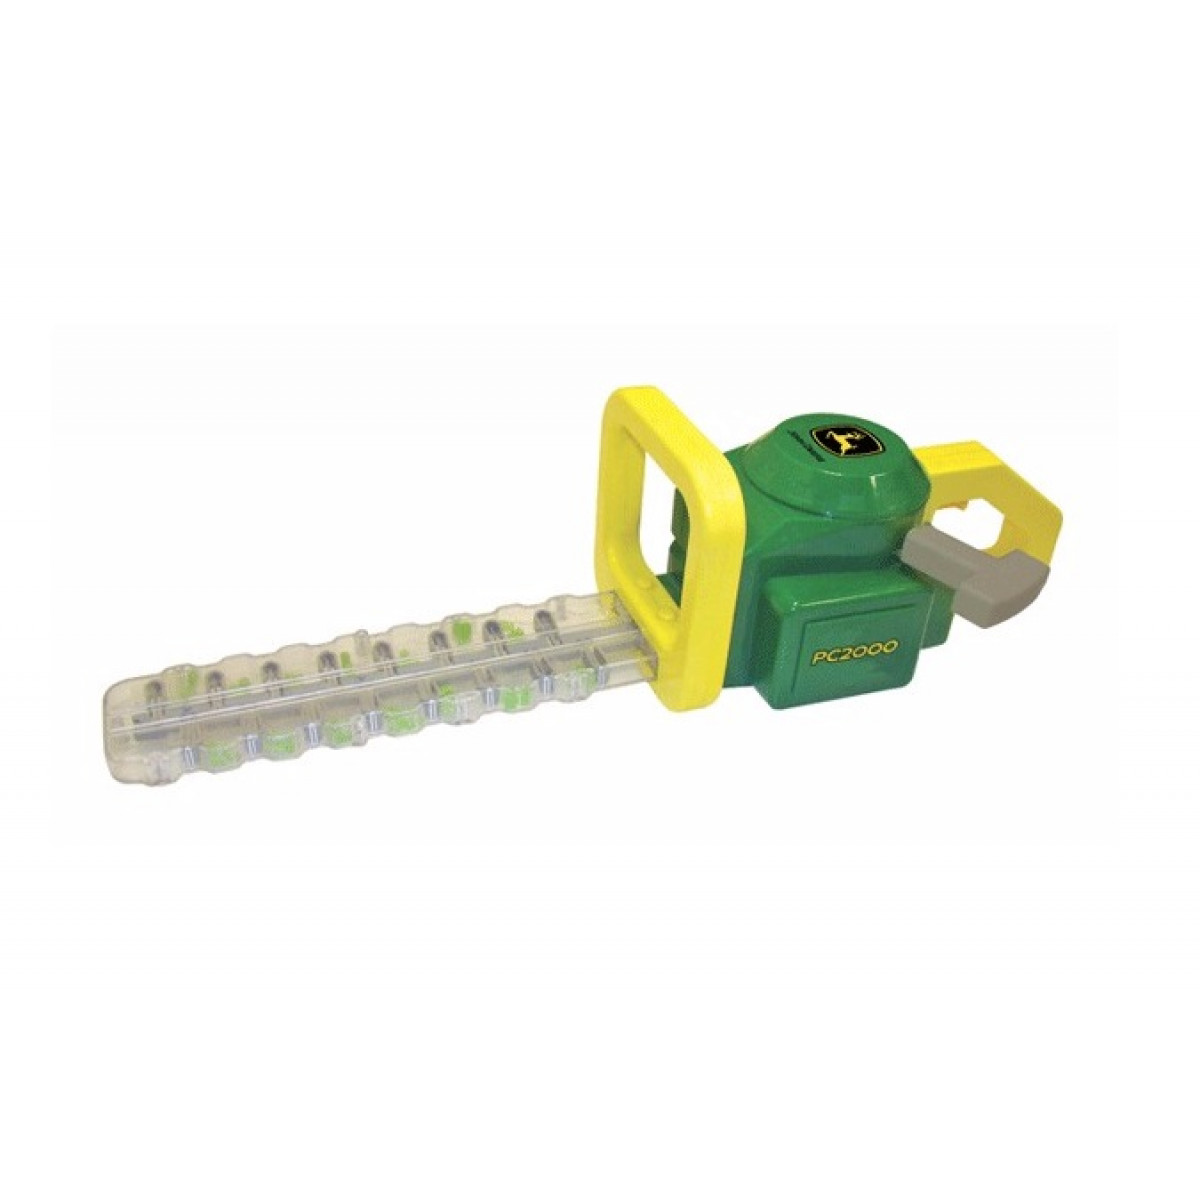 John Deere Power Hedge Trimmer - Role Play Tools ...